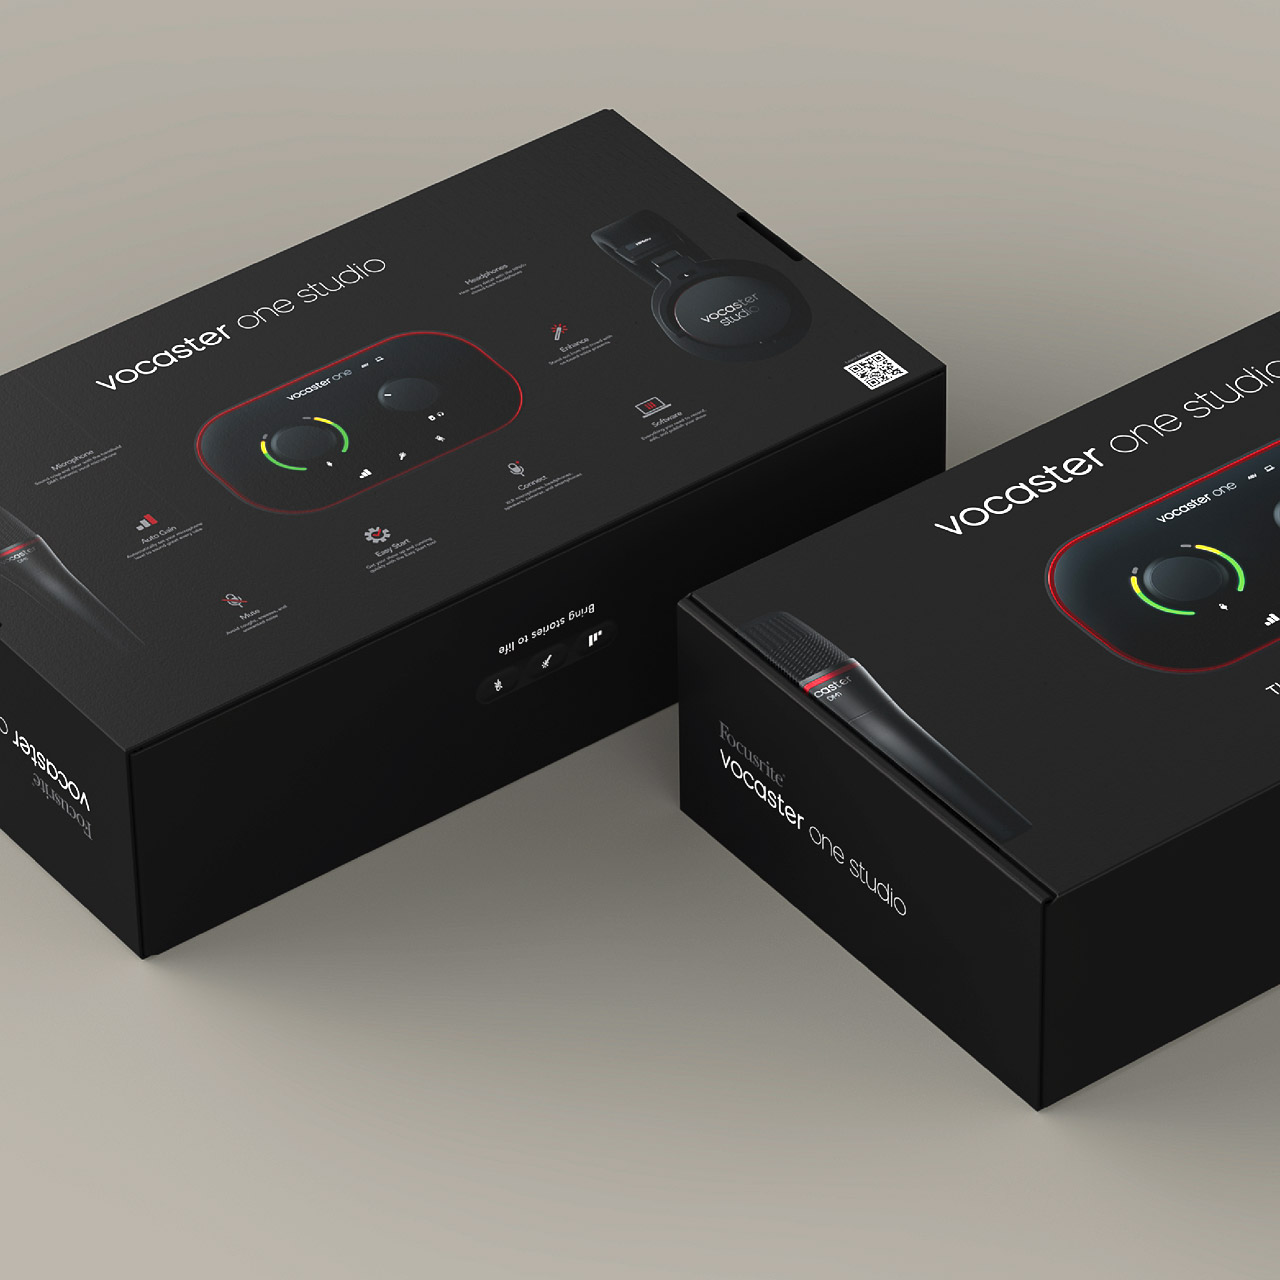 Front and back views of Vocaster One studio black box